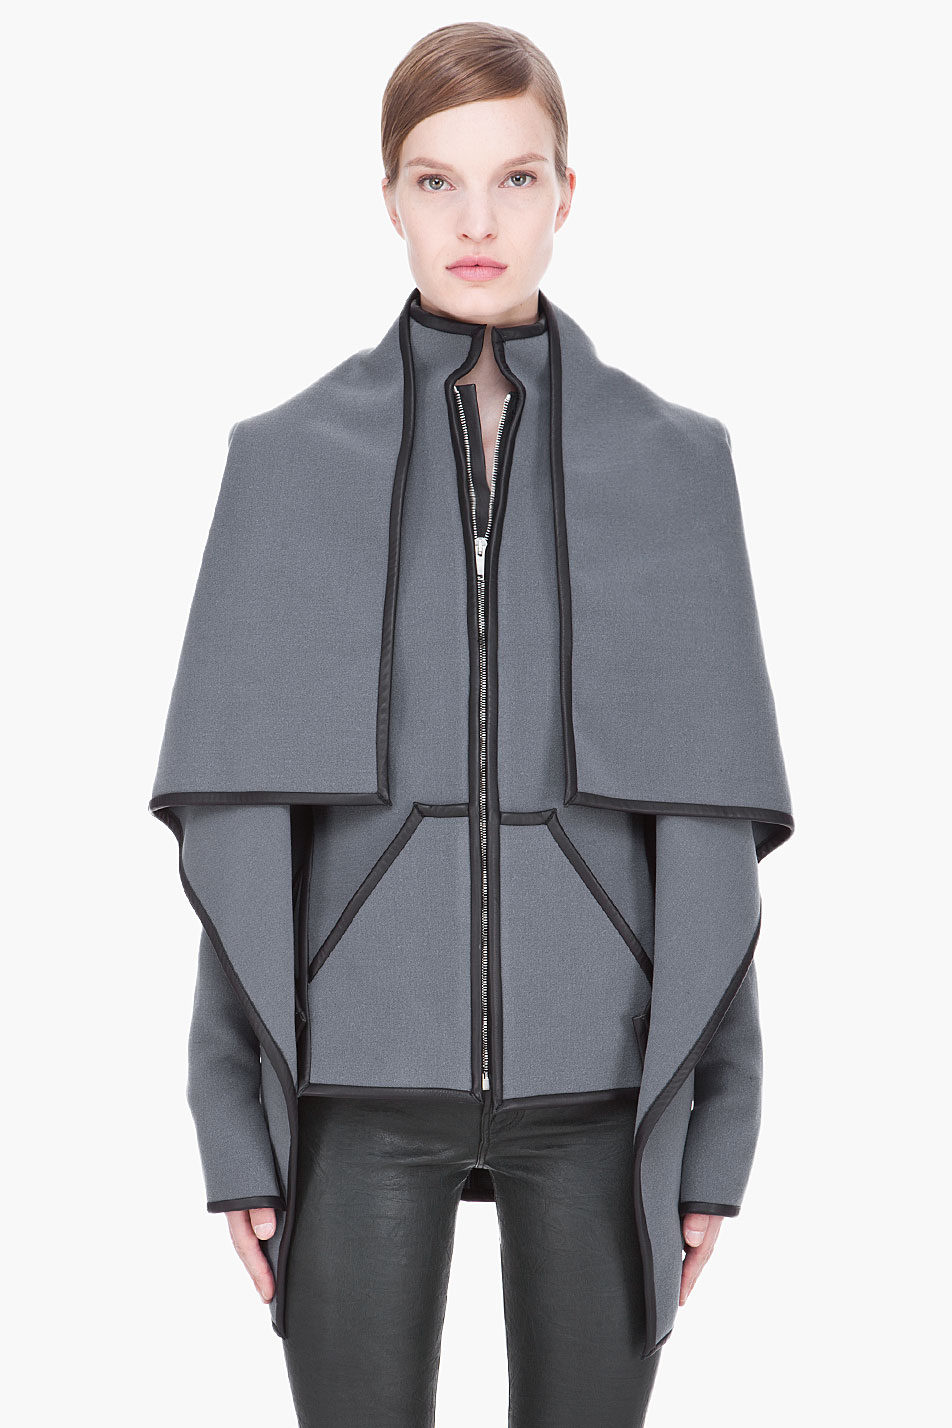 Lyst - Gareth Pugh Grey Leather Trimmed Layered Wrap Jacket in Gray